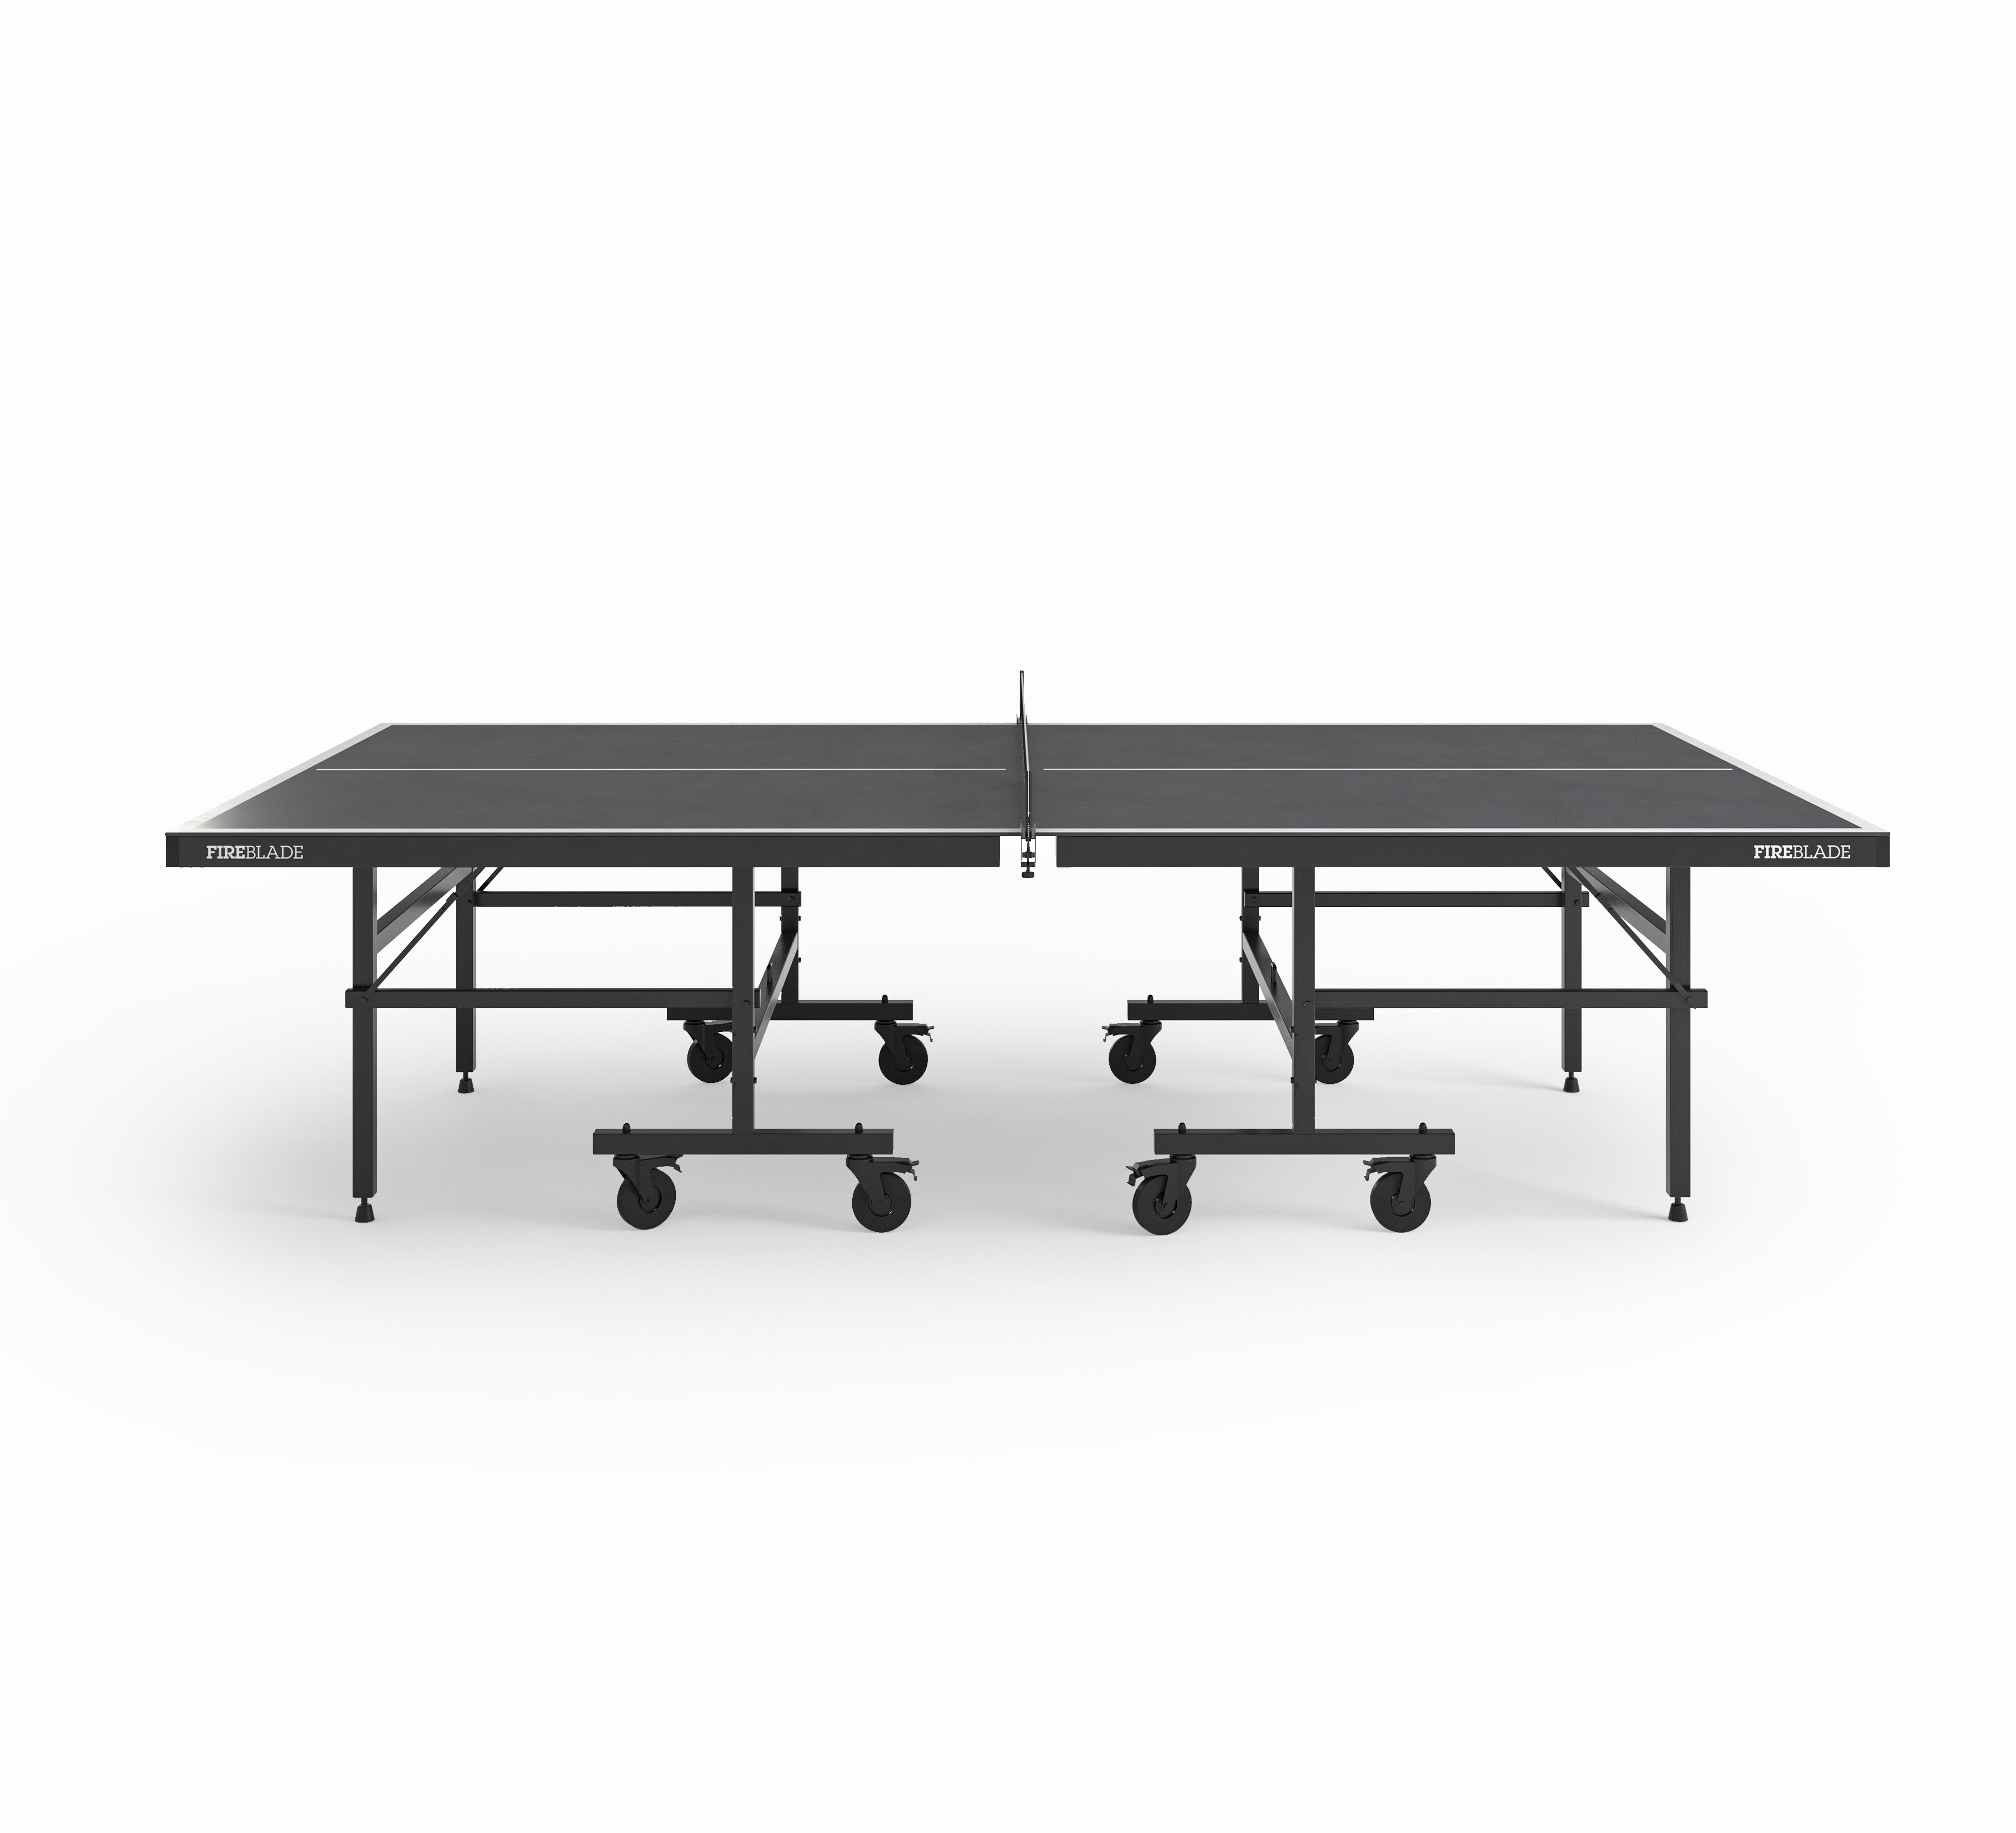 Ping Pong Tables, Buy Table Tennis Tables